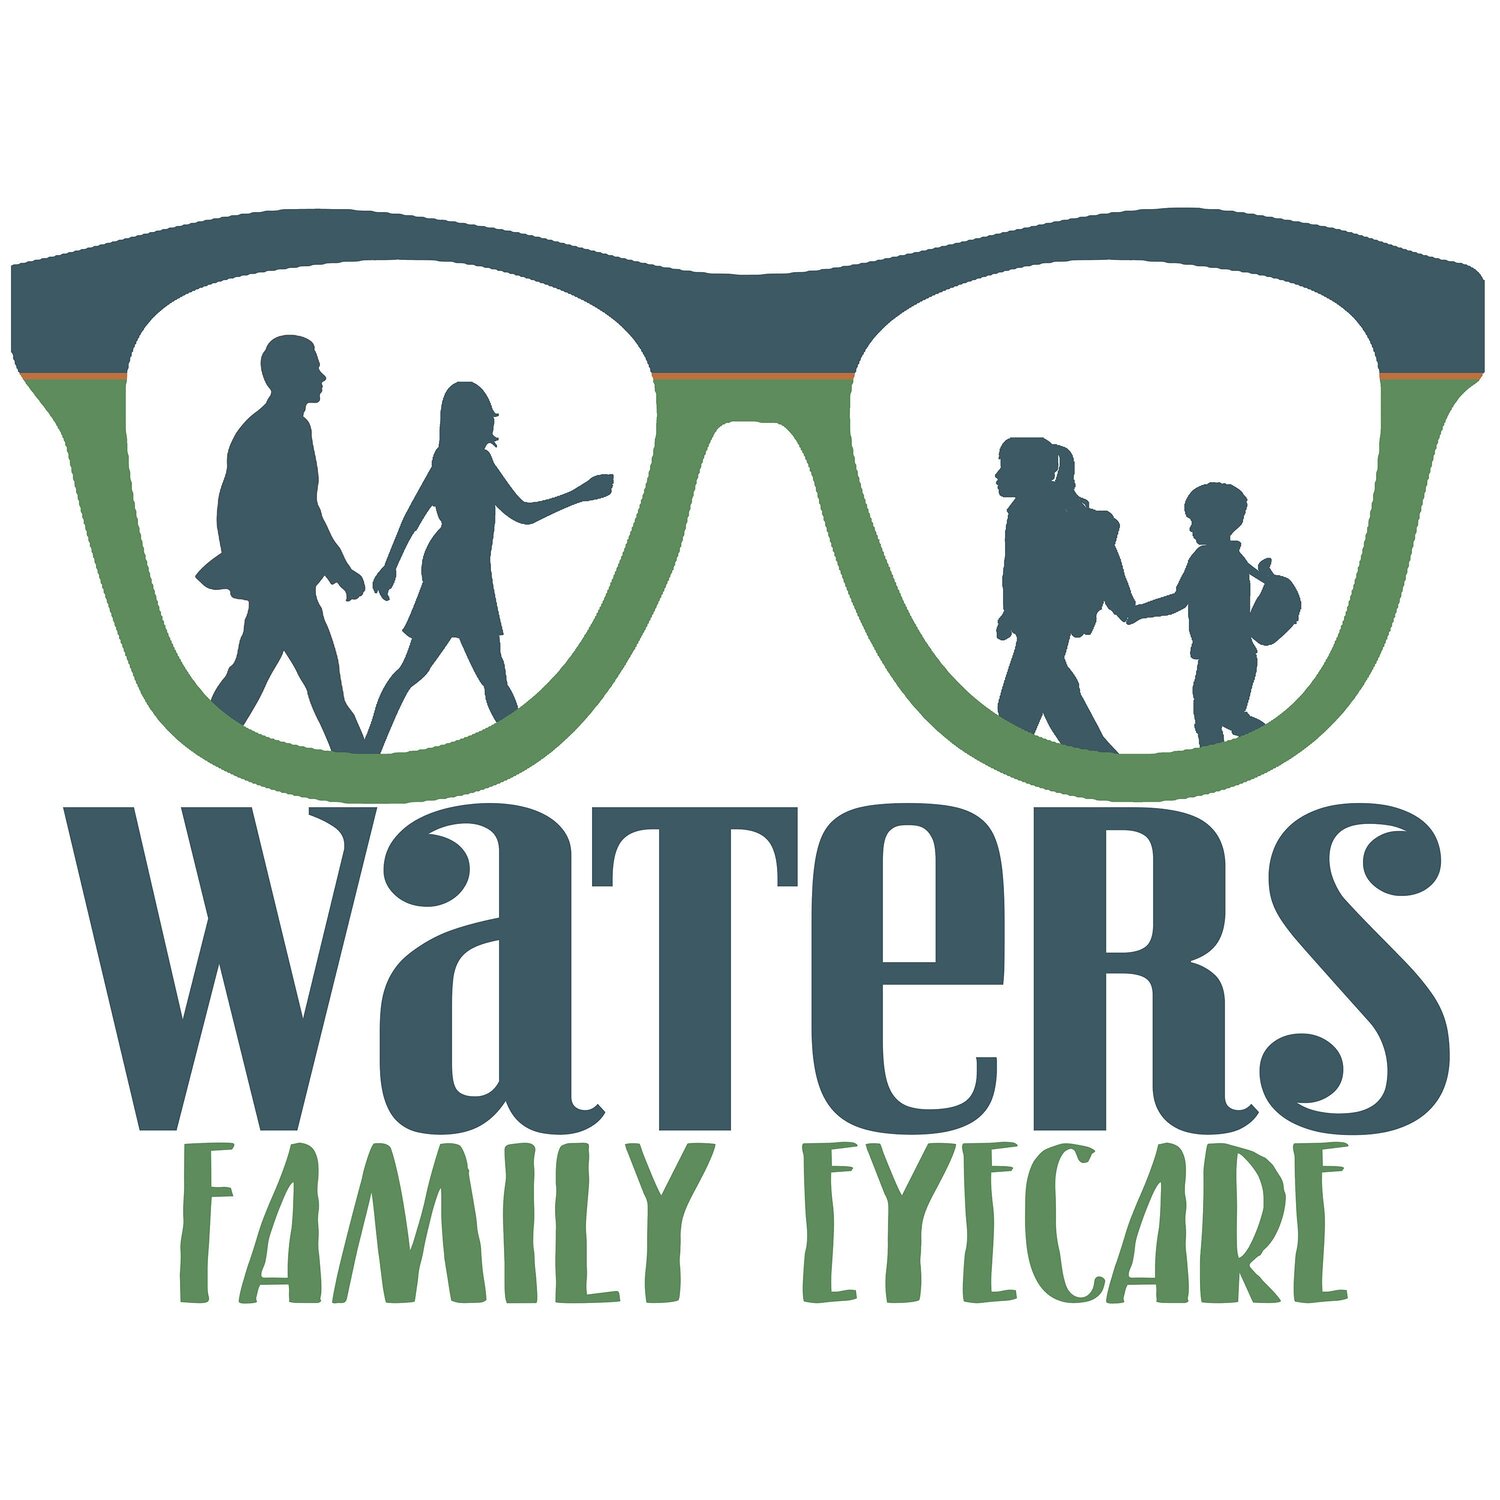 Waters Family Eyecare